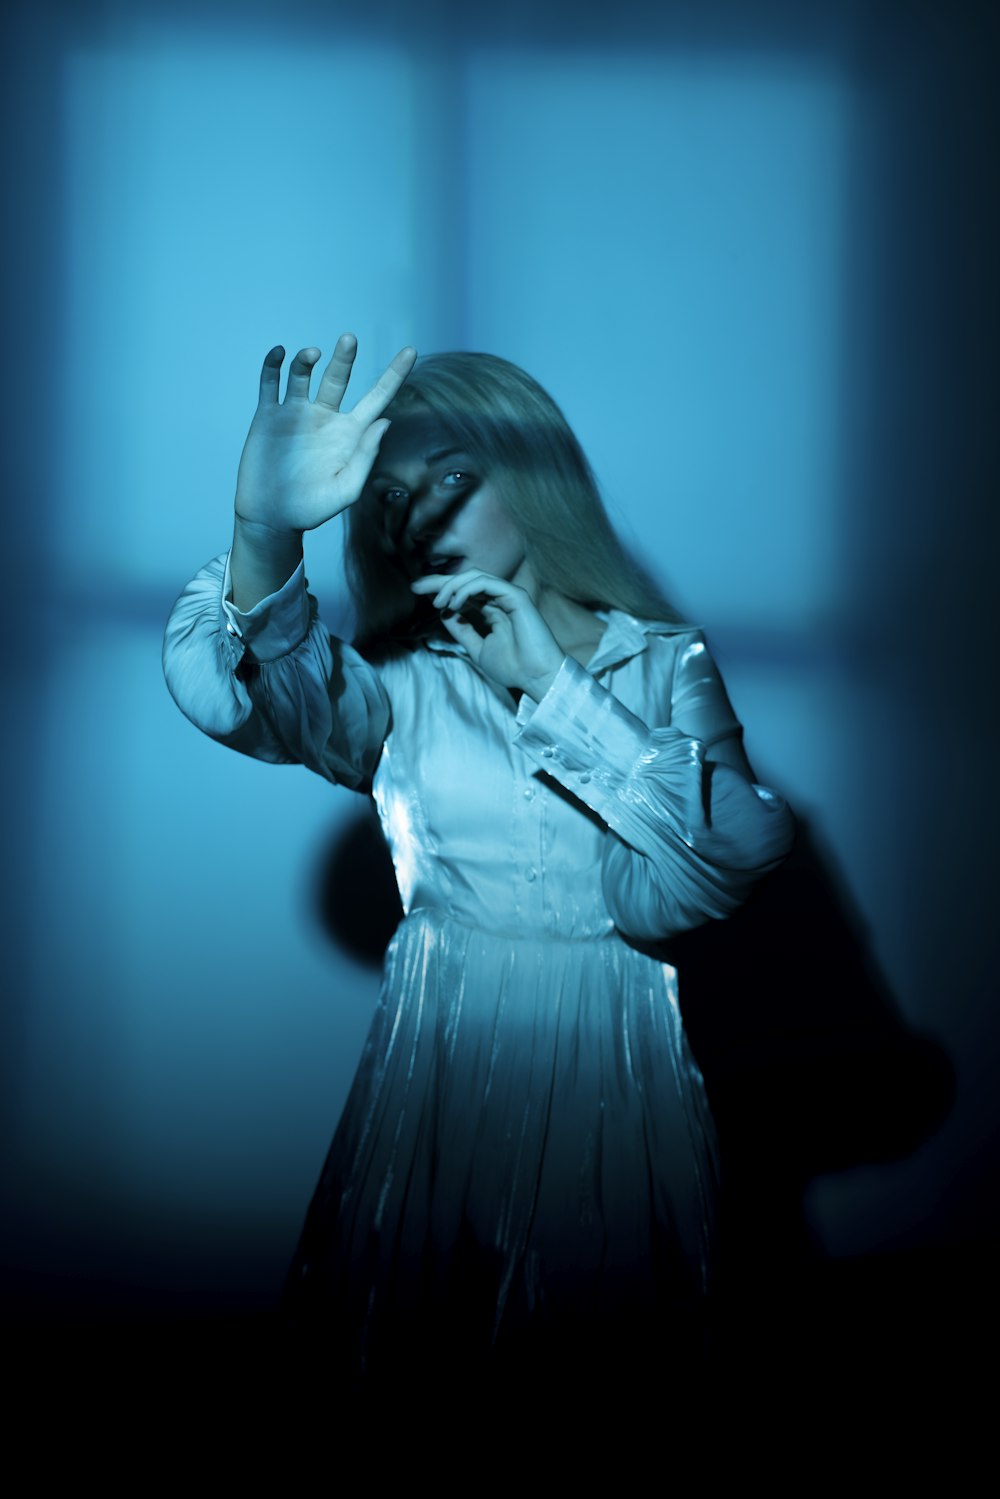 woman in white dress shirt covering her face with her hands